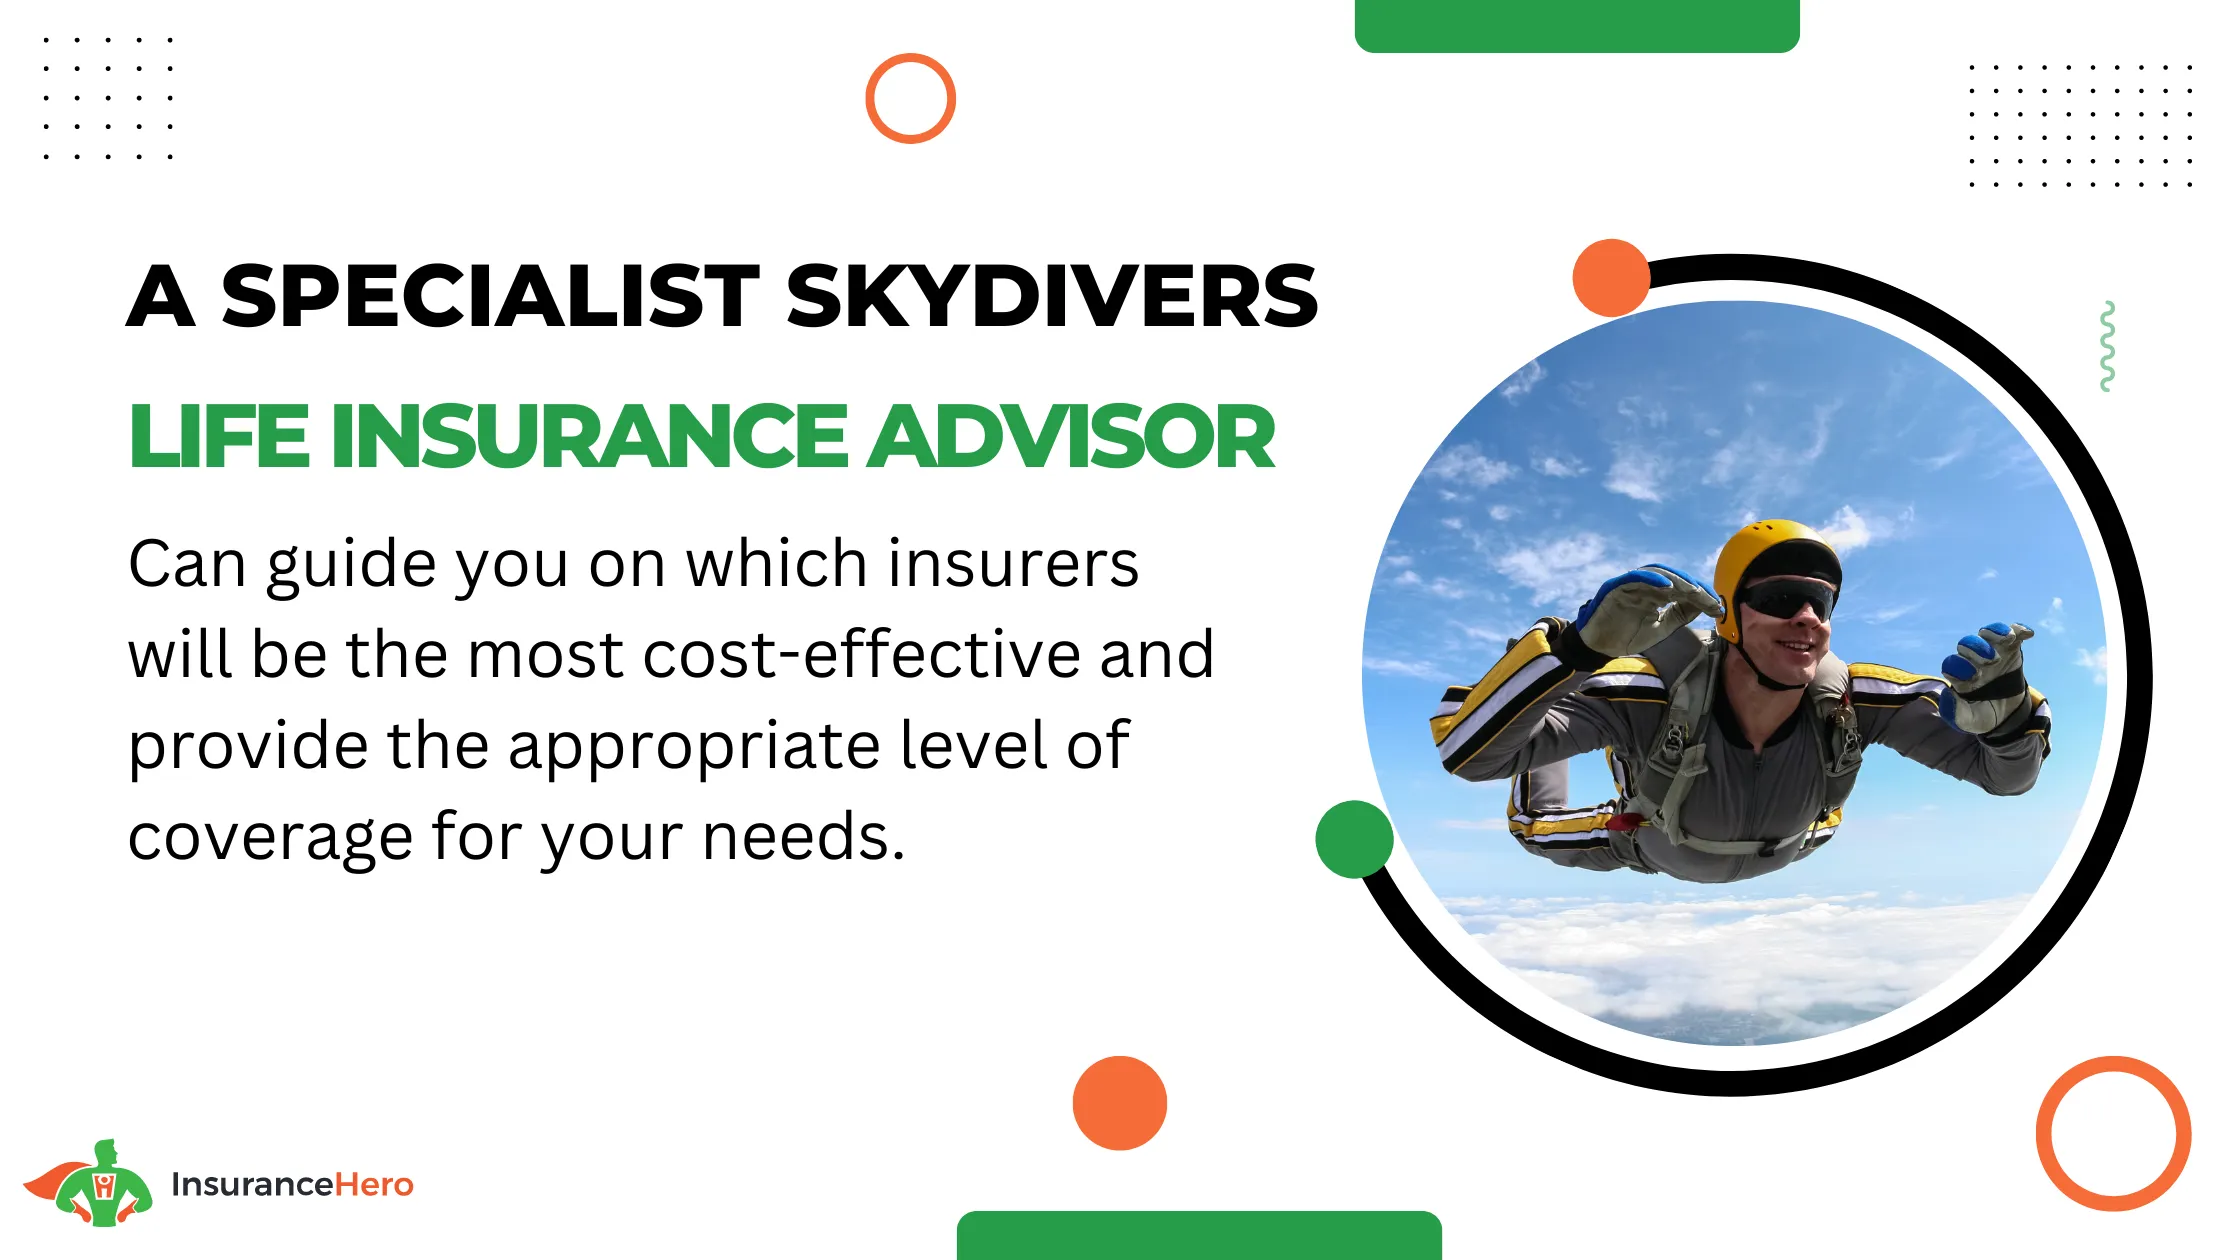 life insurance advice for skydivers and base jumpers